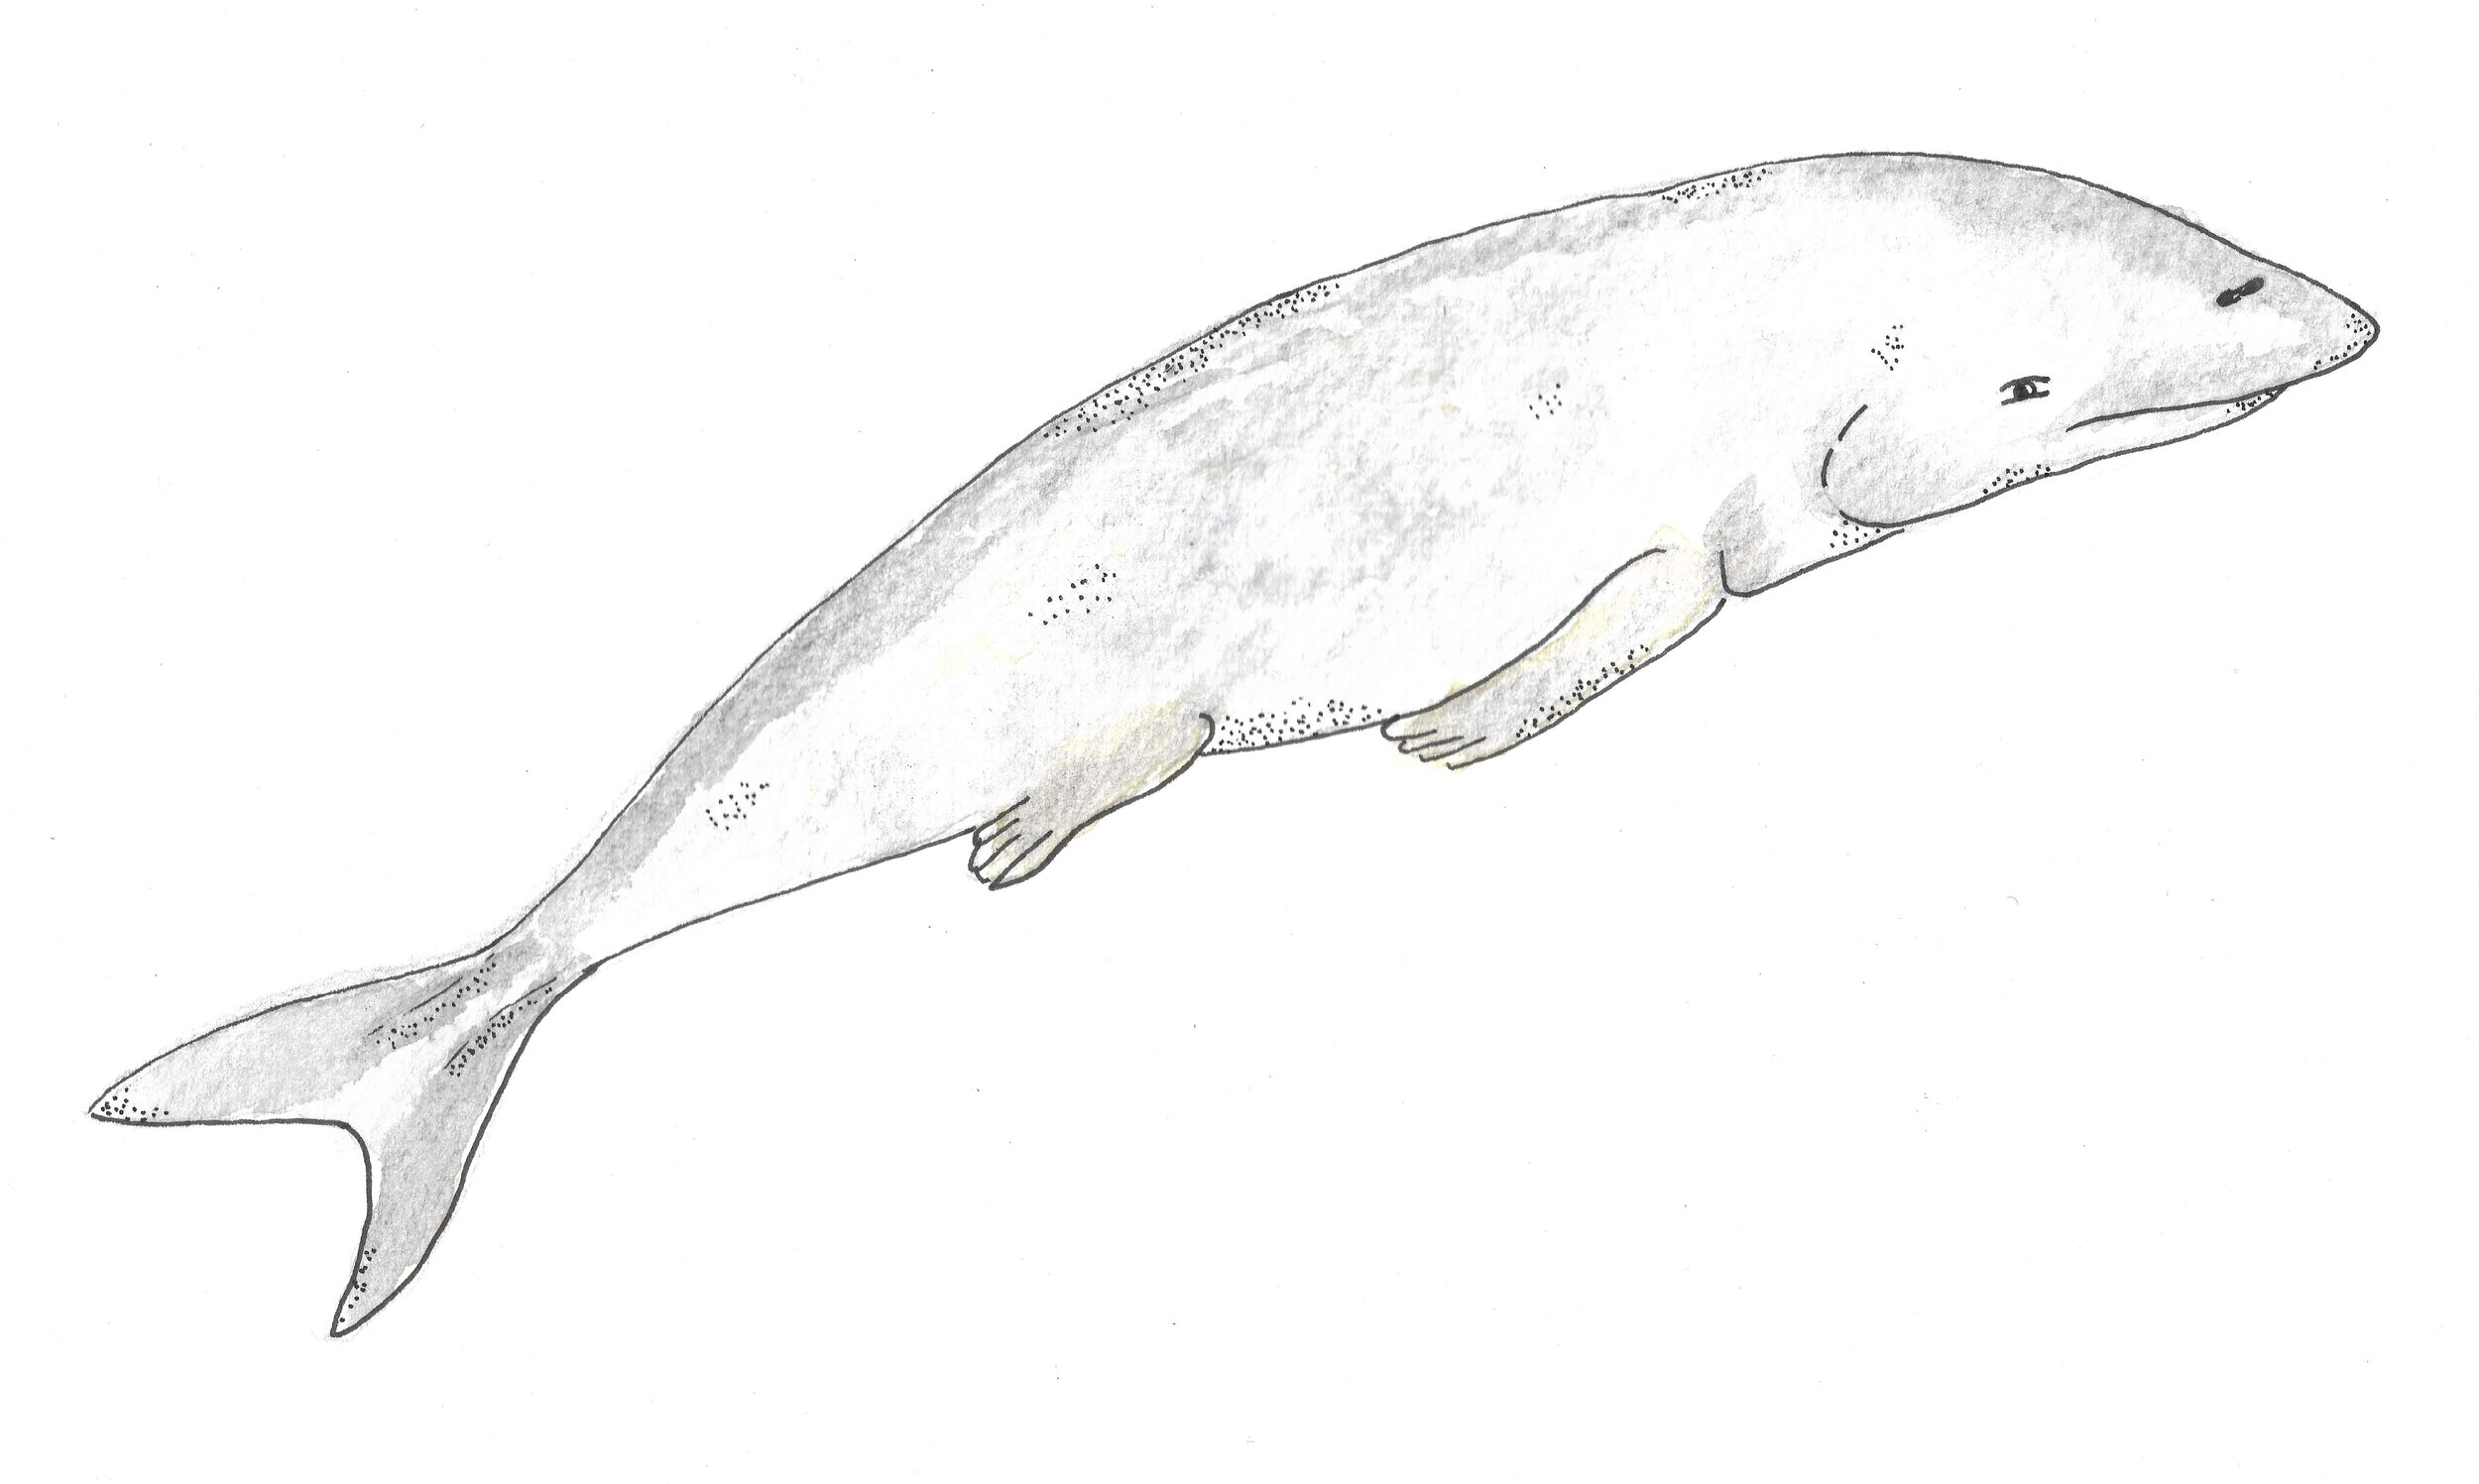 Protocetids were primitive whales that had become pursuit predators and started swimming across continents.